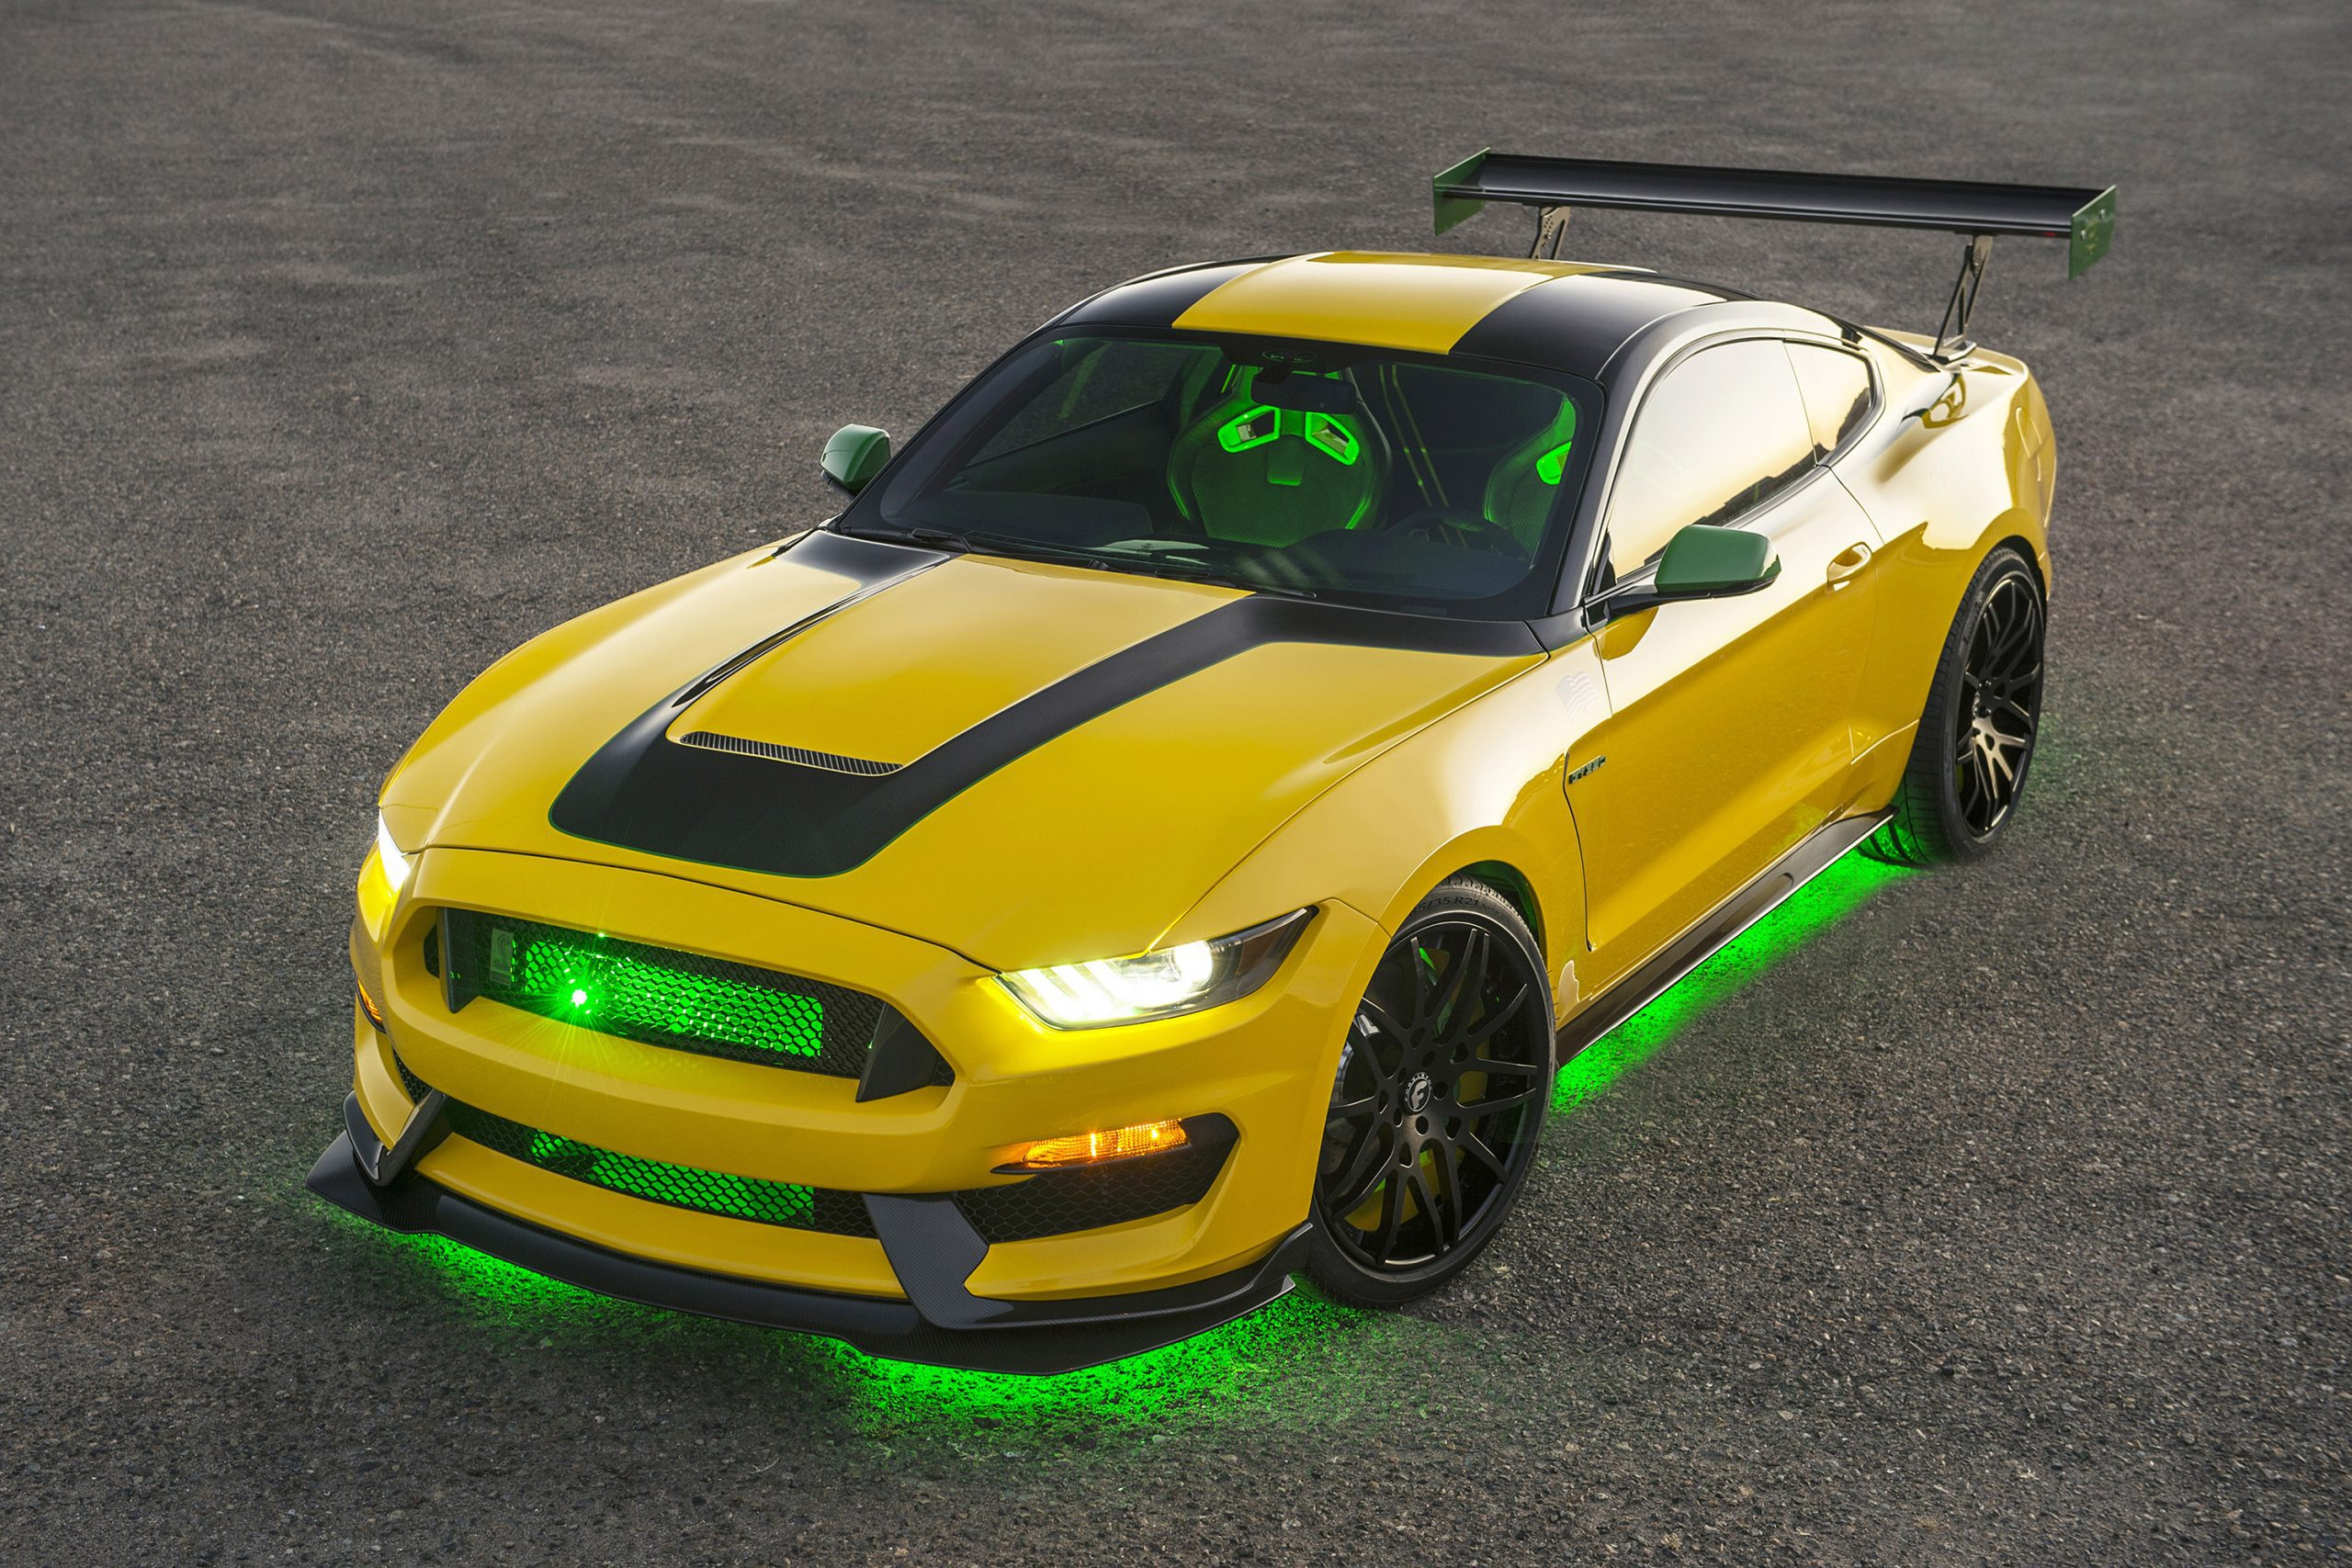 2560x1707 2016 Ford Shelby Mustang GT350 'Ole Yeller' High Quality Wallpaper Mustang Specs